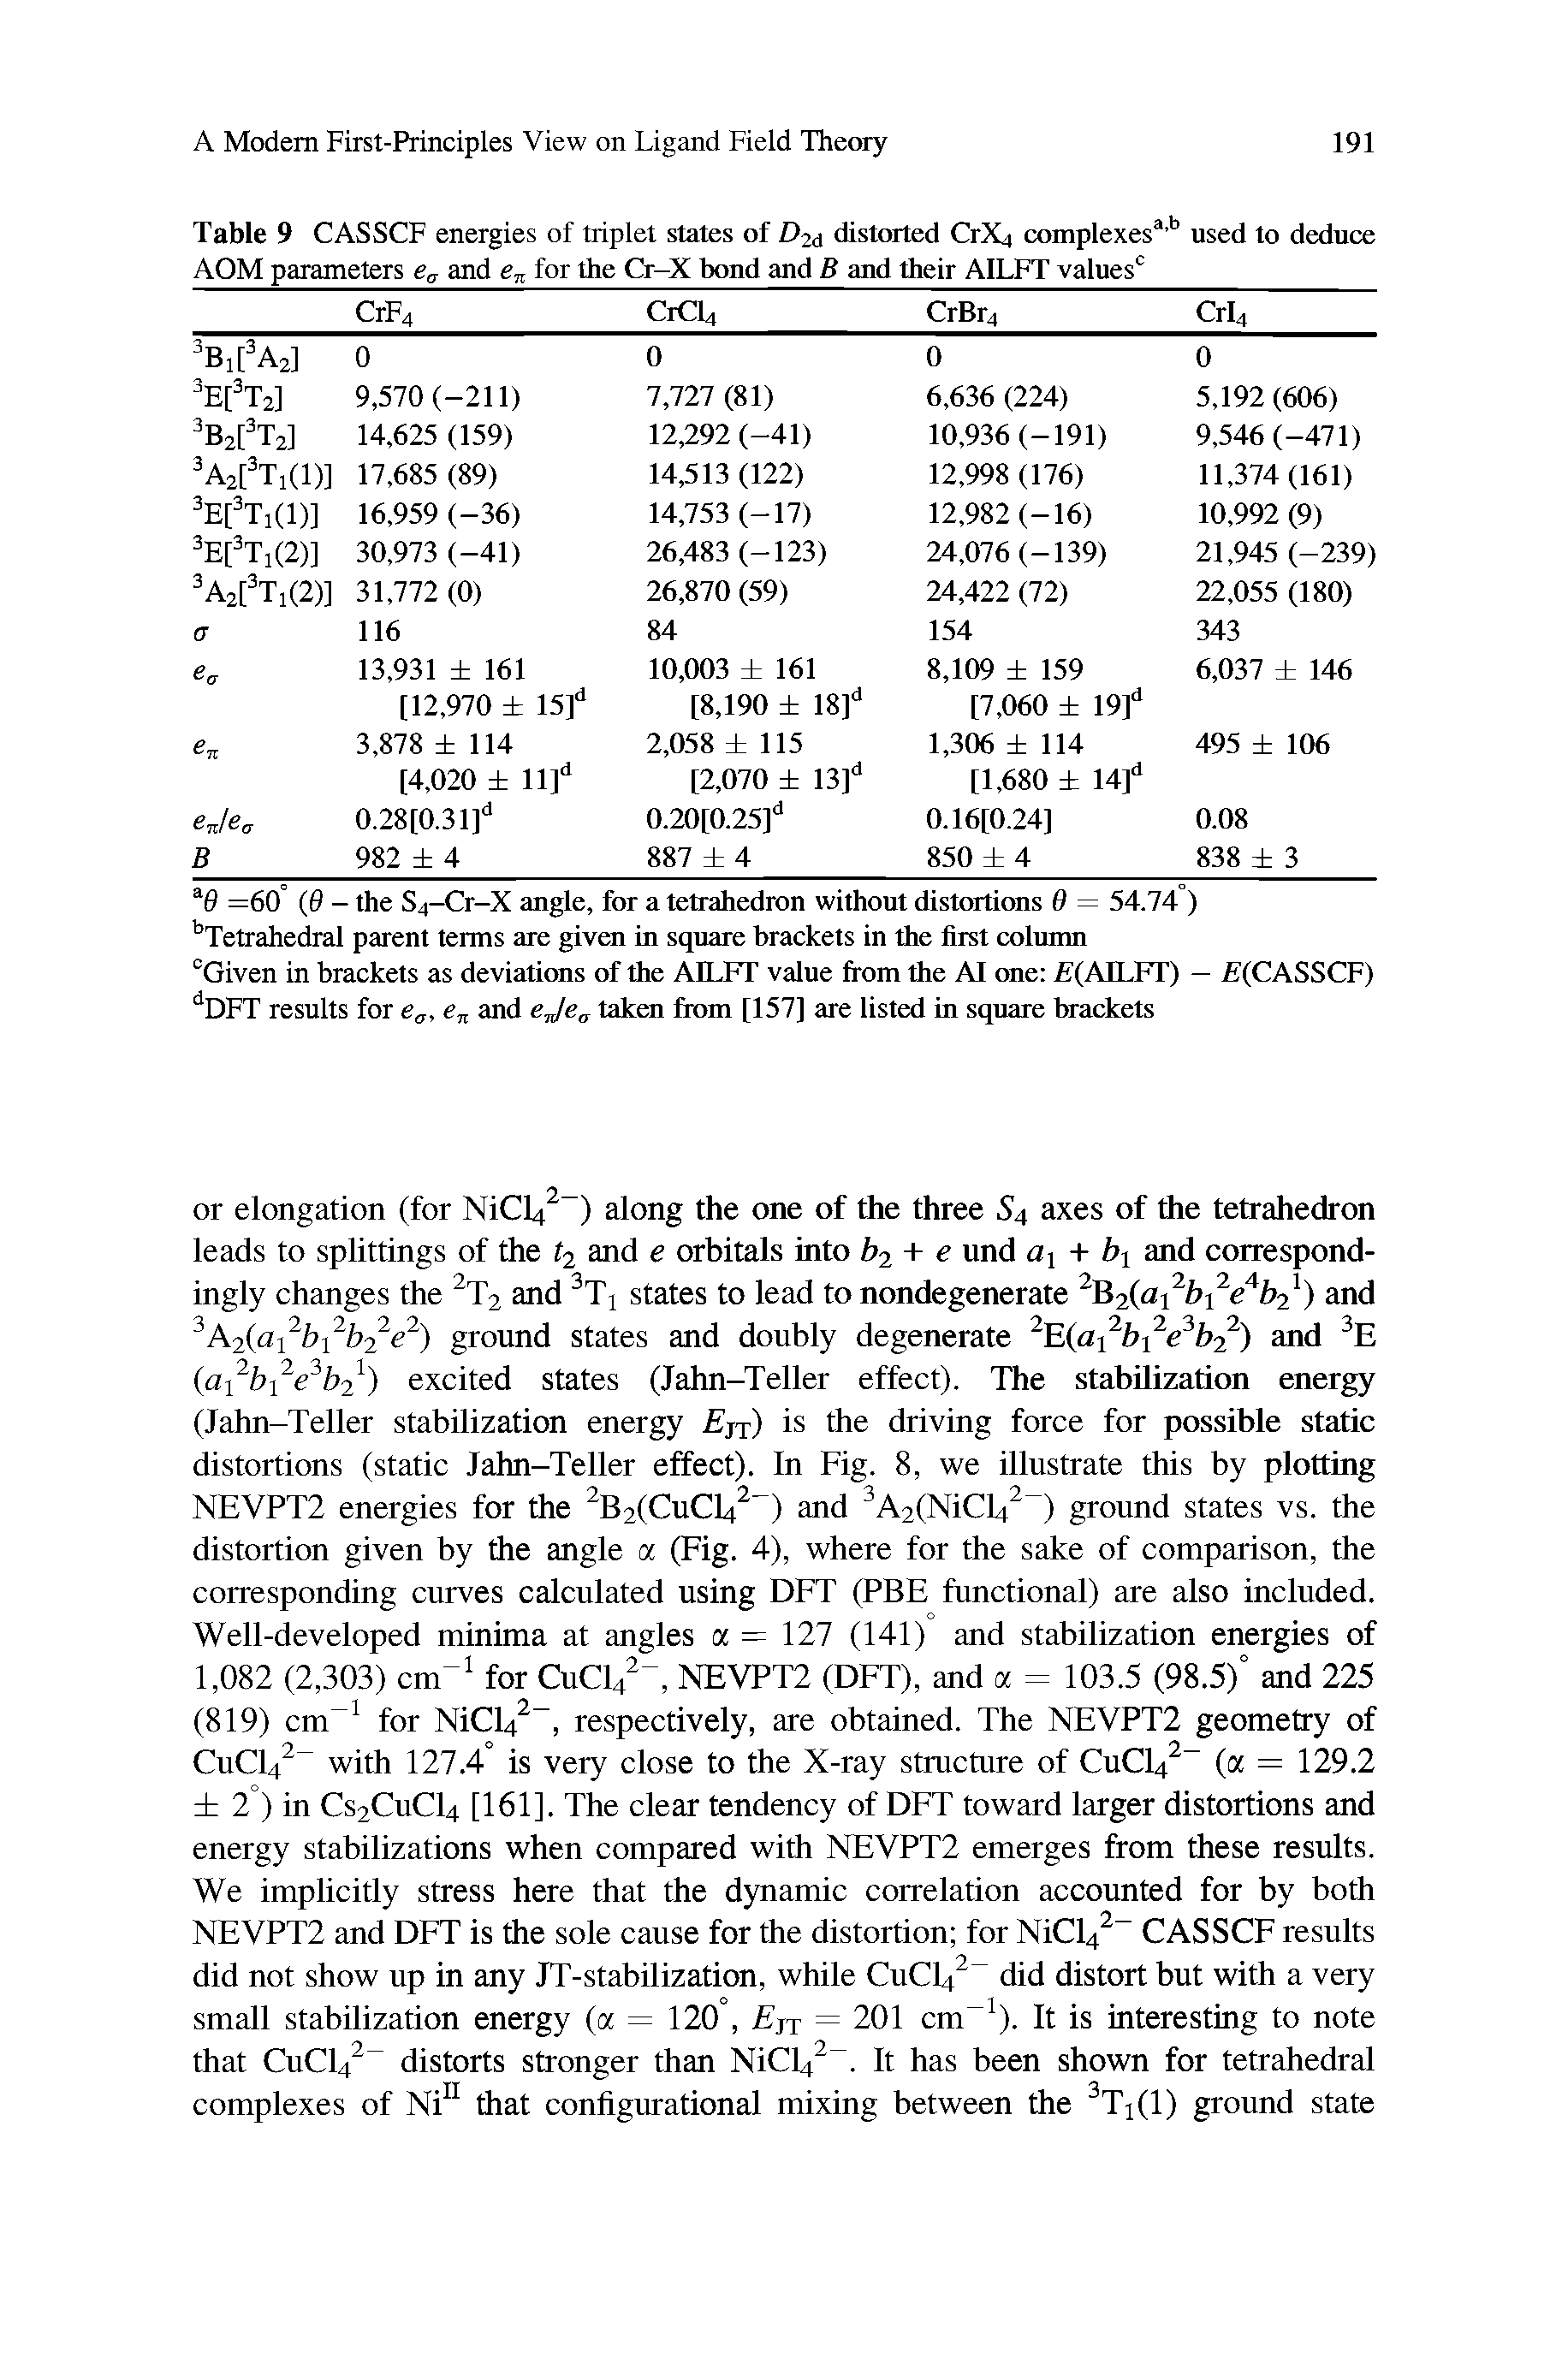 Table 9 CASSCF energies of triplet states of D2a distorted CrX4 complexes3,13 used to deduce AOM parameters ea and en for the Cr-X bond and B and their AILFT values0 ...